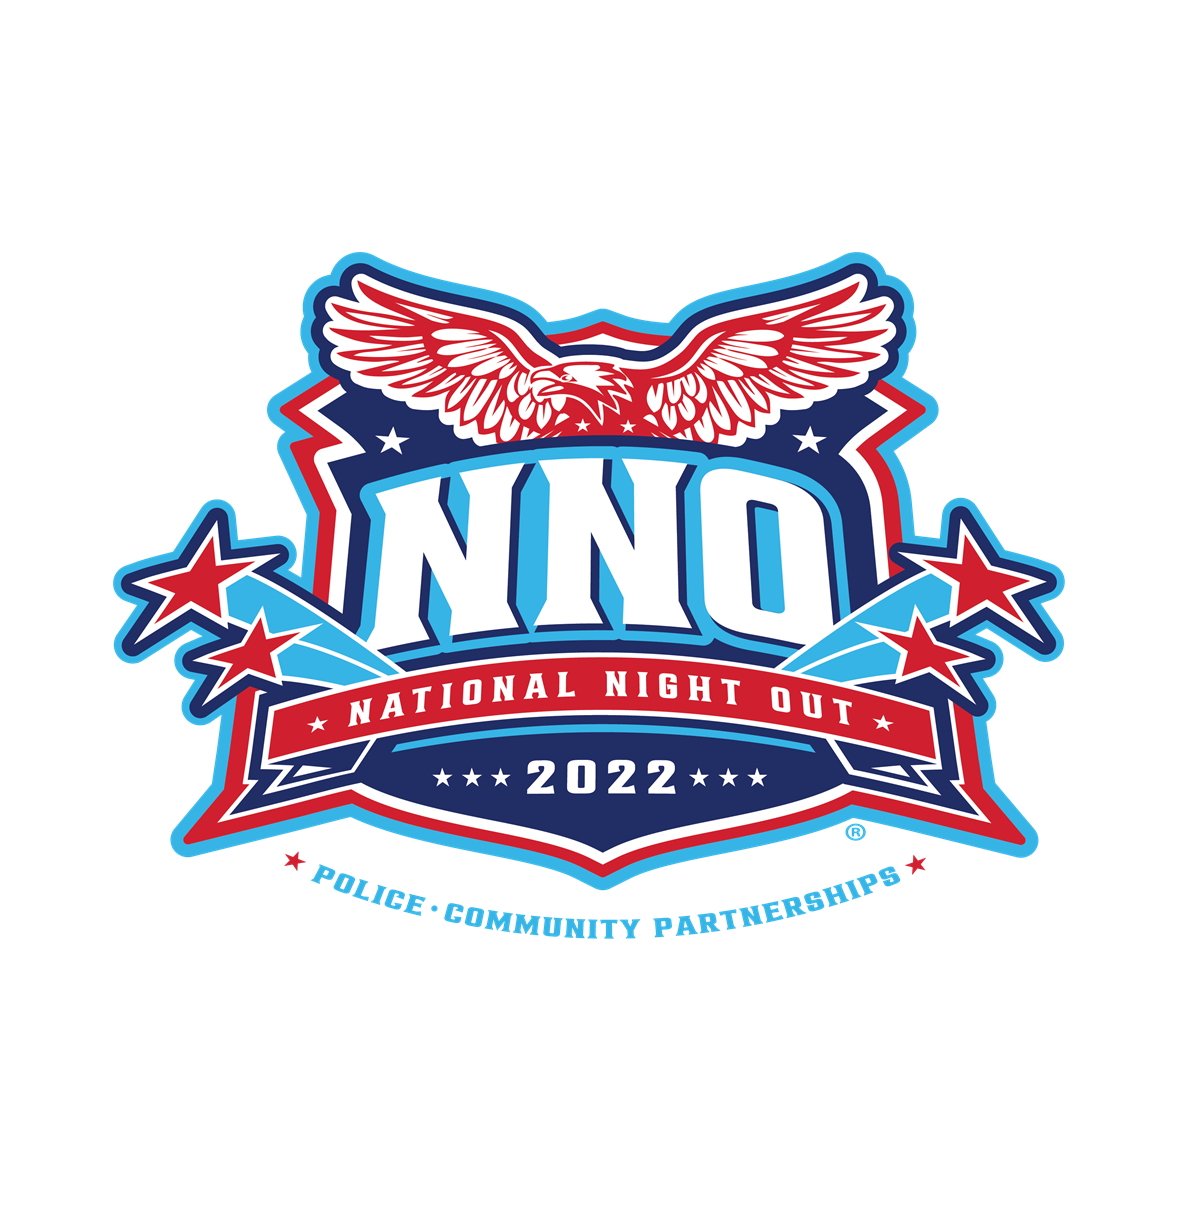 2022 National Night Out logo